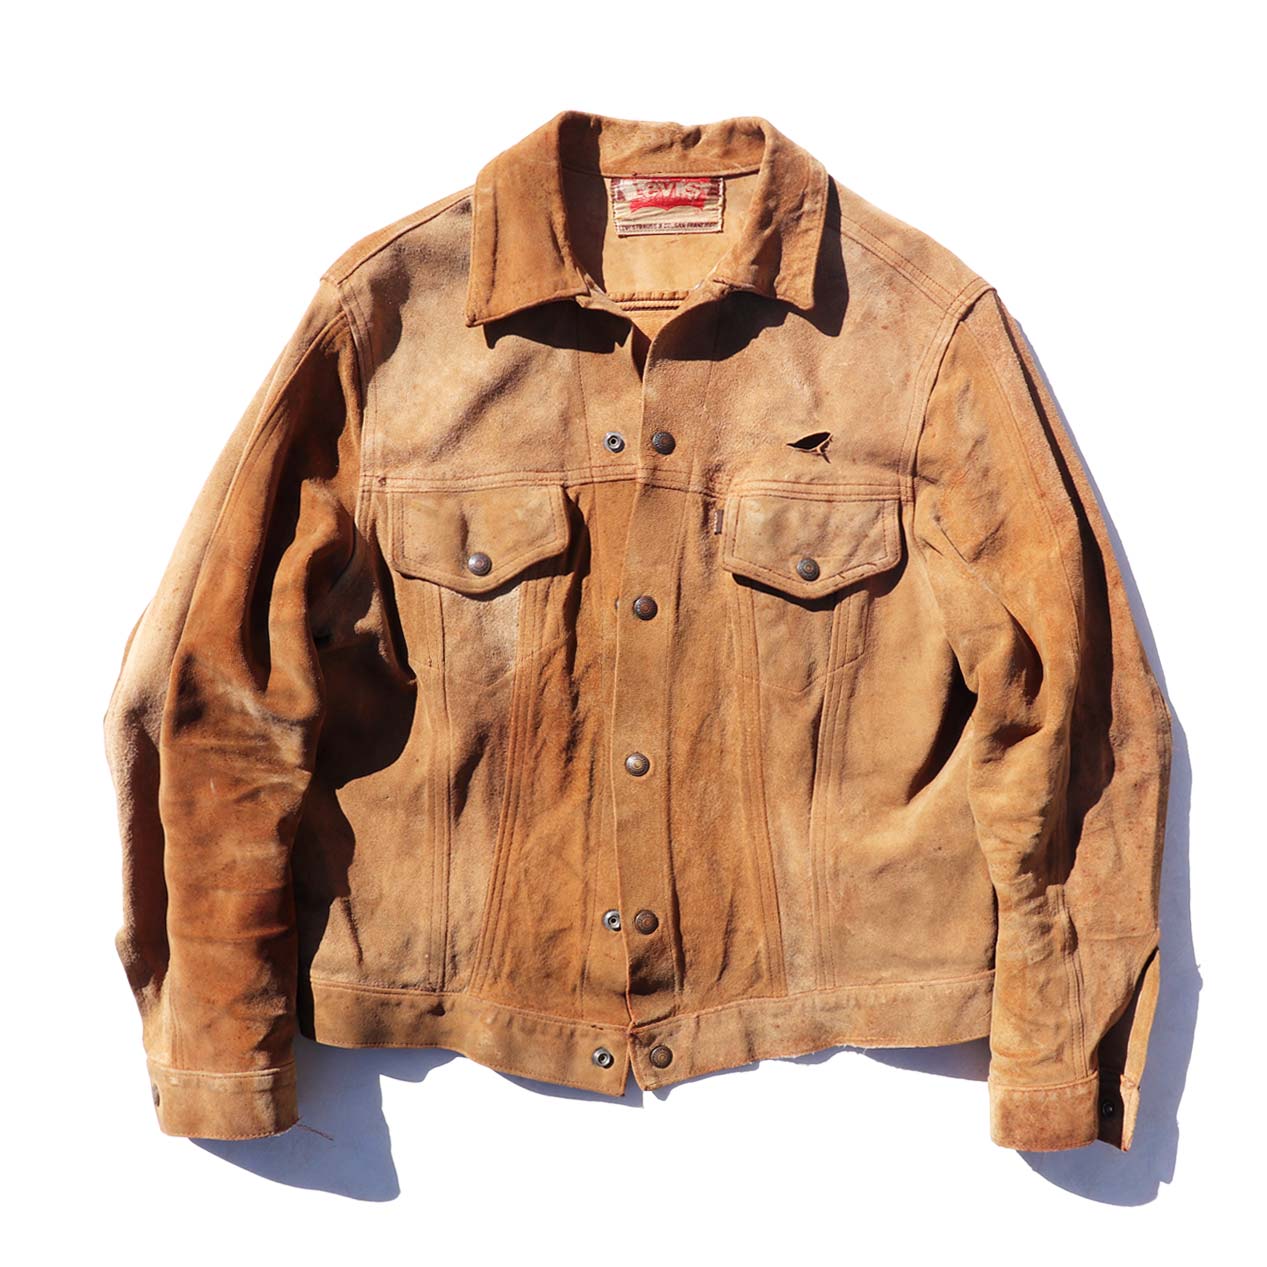 POST JUNK 60's～ LEVI'S 70505 BIG-E Suede Leather Jacket [About 40]